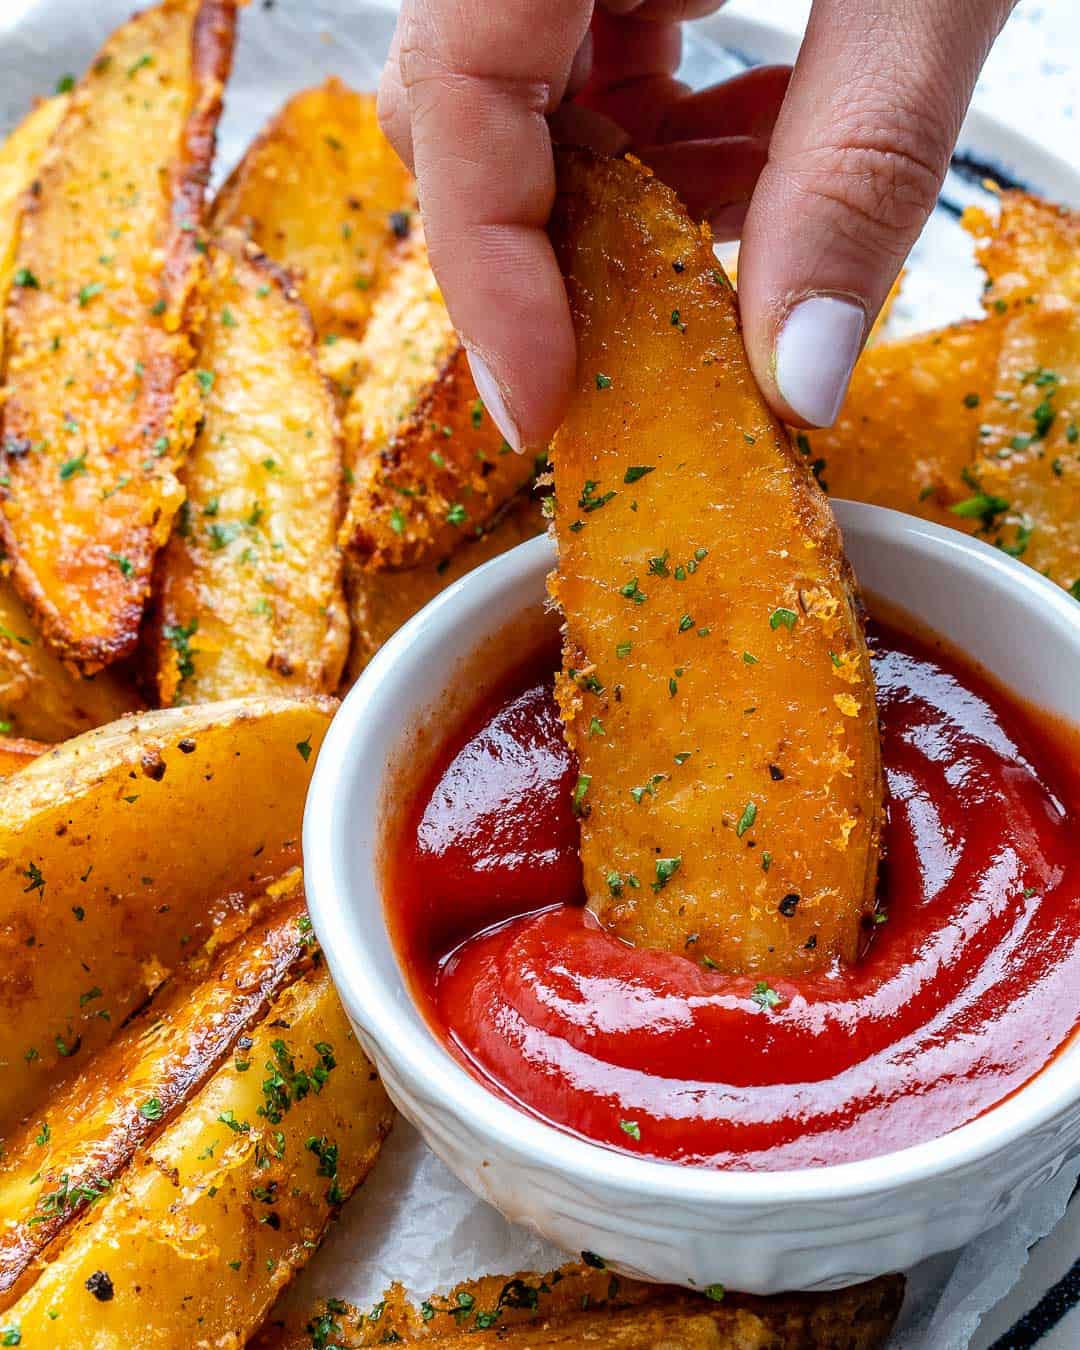 hand holding potato wedges and dipping in ketchup